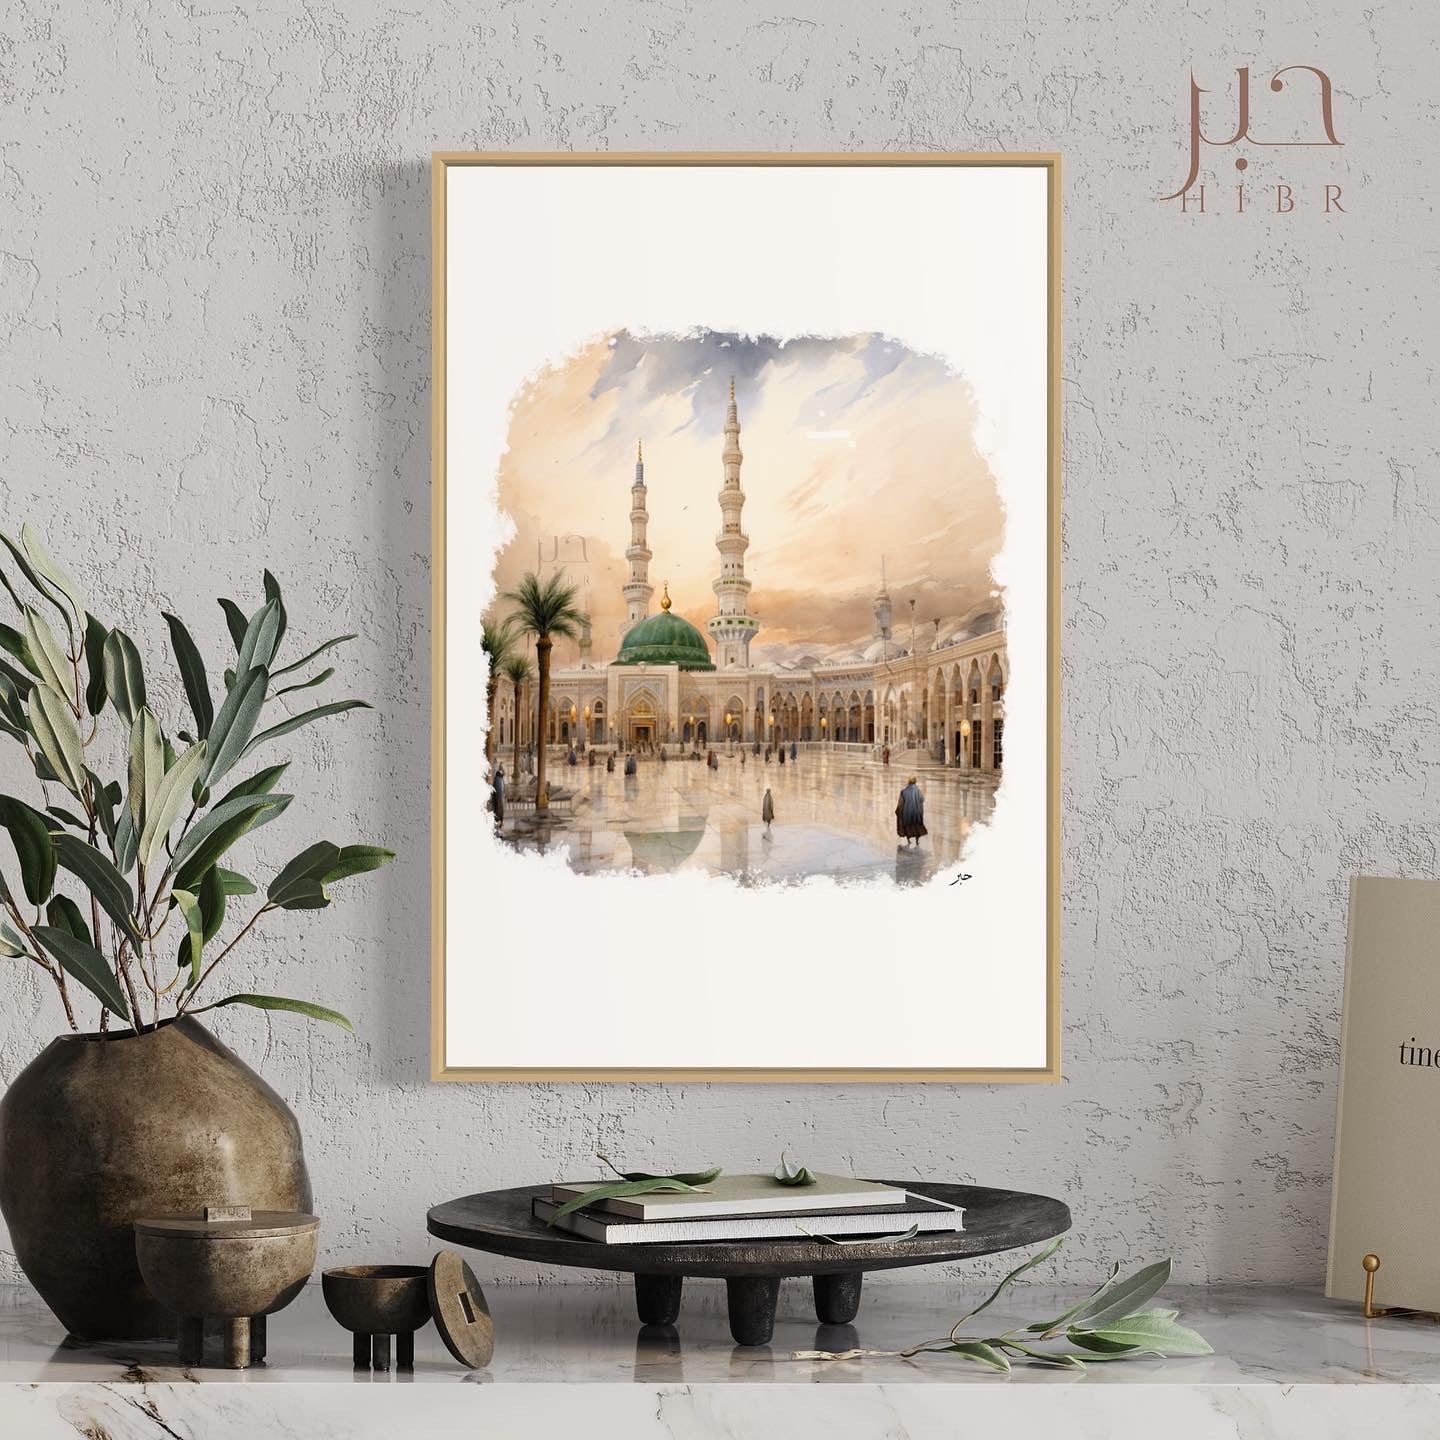 Divine Masjid Nabawi: A Breathtaking Watercolour Painting of Islam's Sacred Mosque